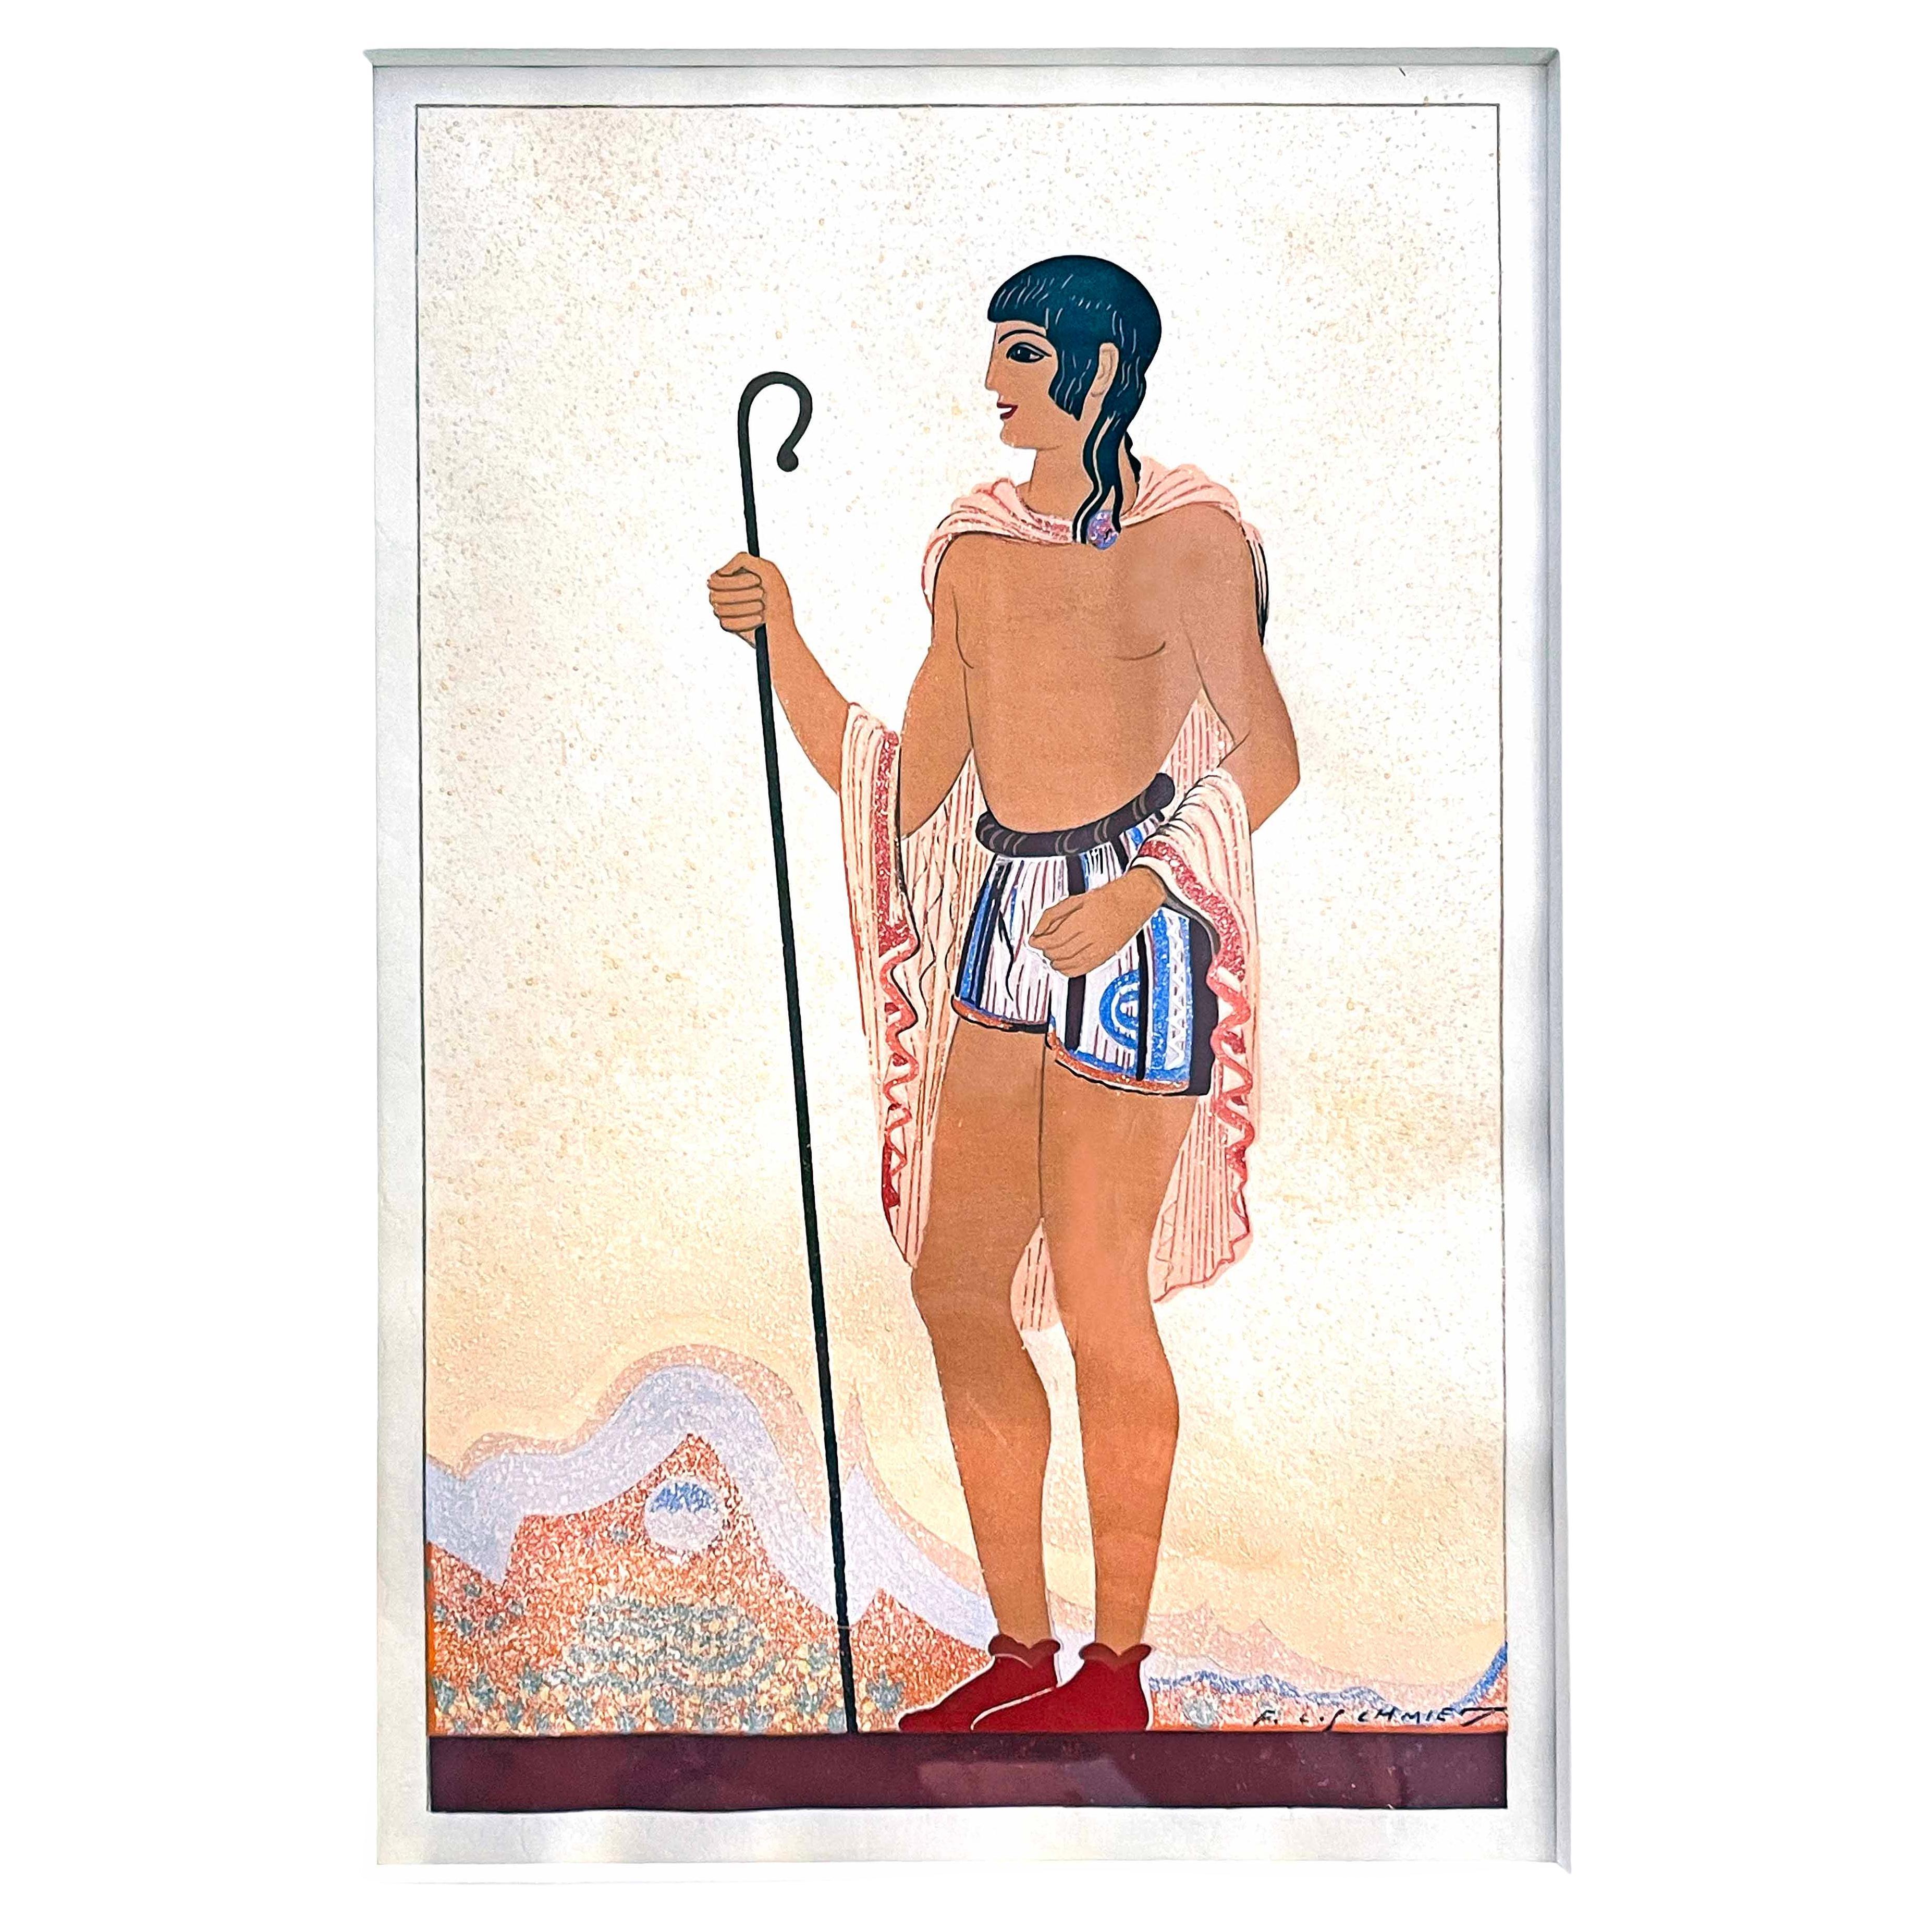 "Shepherd with Staff", High Style Art Deco Painting by Schmied, Book Illustrator For Sale